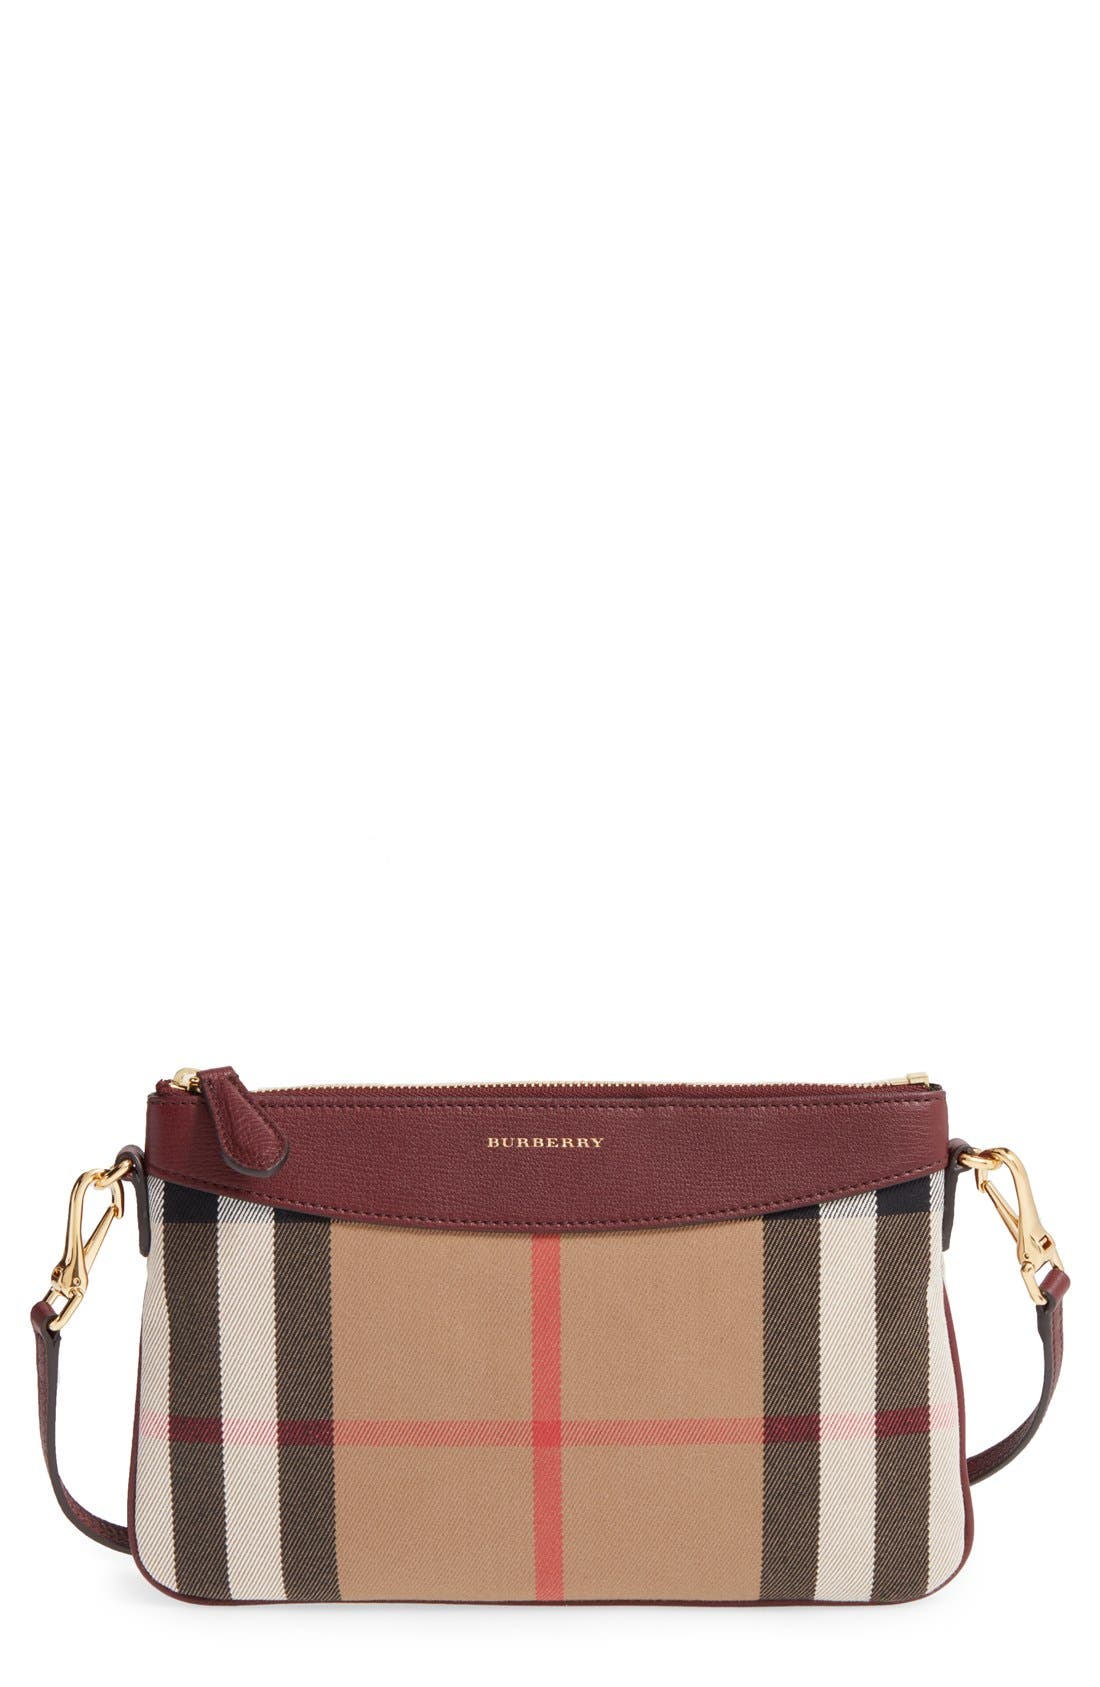 burberry on sale nordstrom